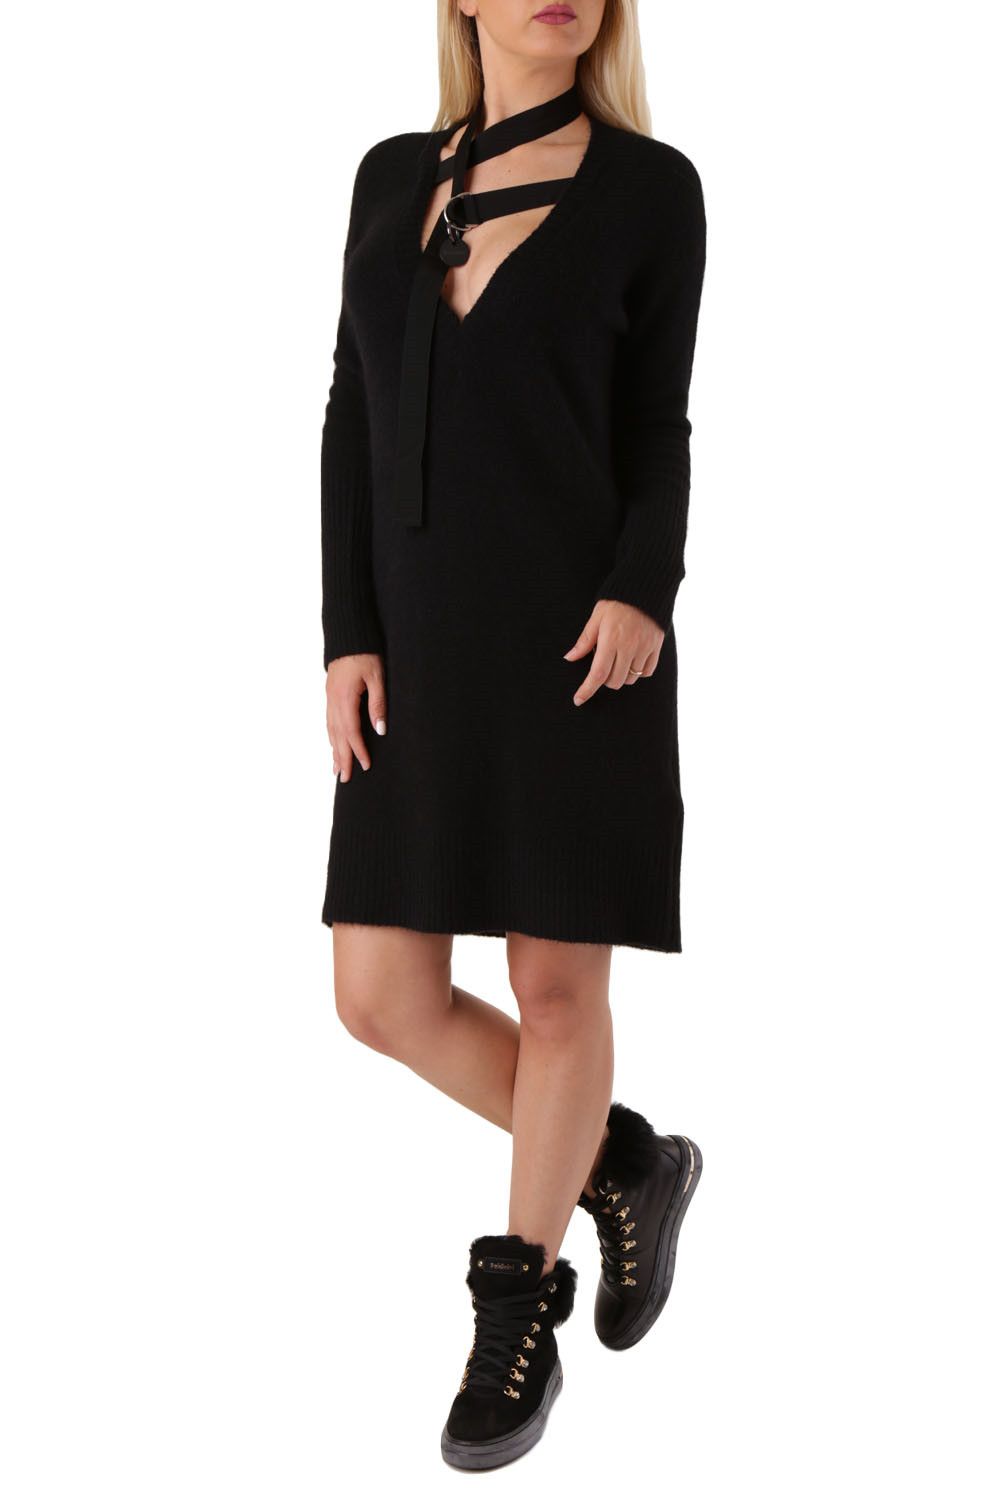 Brand: Diesel
Gender: Women
Type: Dresses
Season: Fall/Winter

PRODUCT DETAIL
• Color: black
• Pattern: plain
• Sleeves: long
• Neckline: low-cut v-neck

COMPOSITION AND MATERIAL
• Composition: -49% other fibres -1% elastane -10% wool -40% polyurethane 
•  Washing: machine wash at 30°